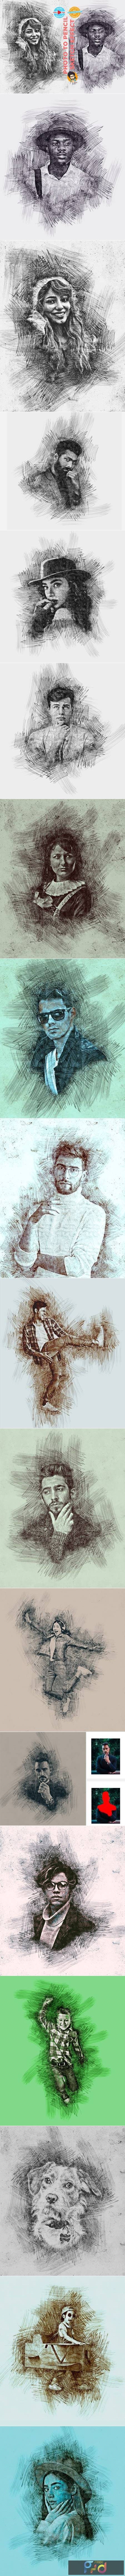 Photo To Pencil Sketch Effect 6117774 1